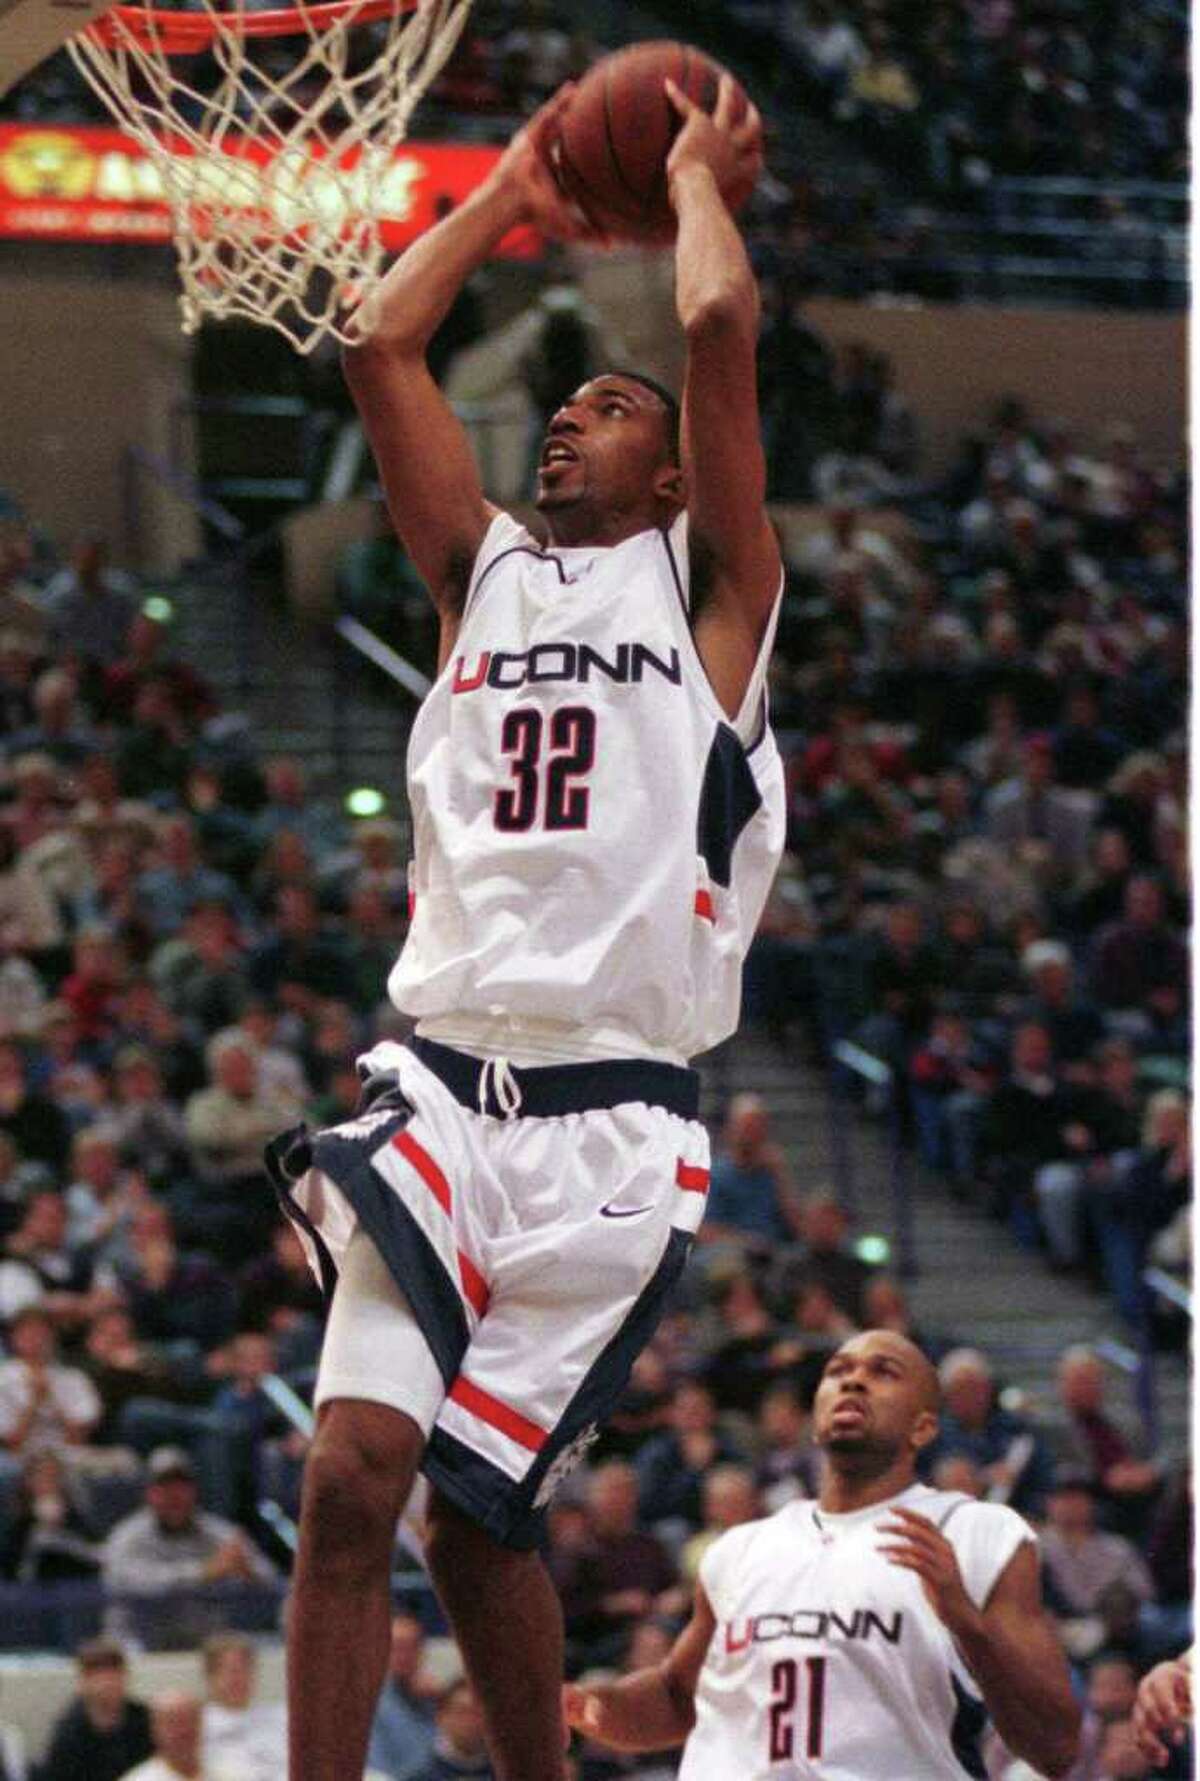 Top 10 UConn men's basketball players of all time